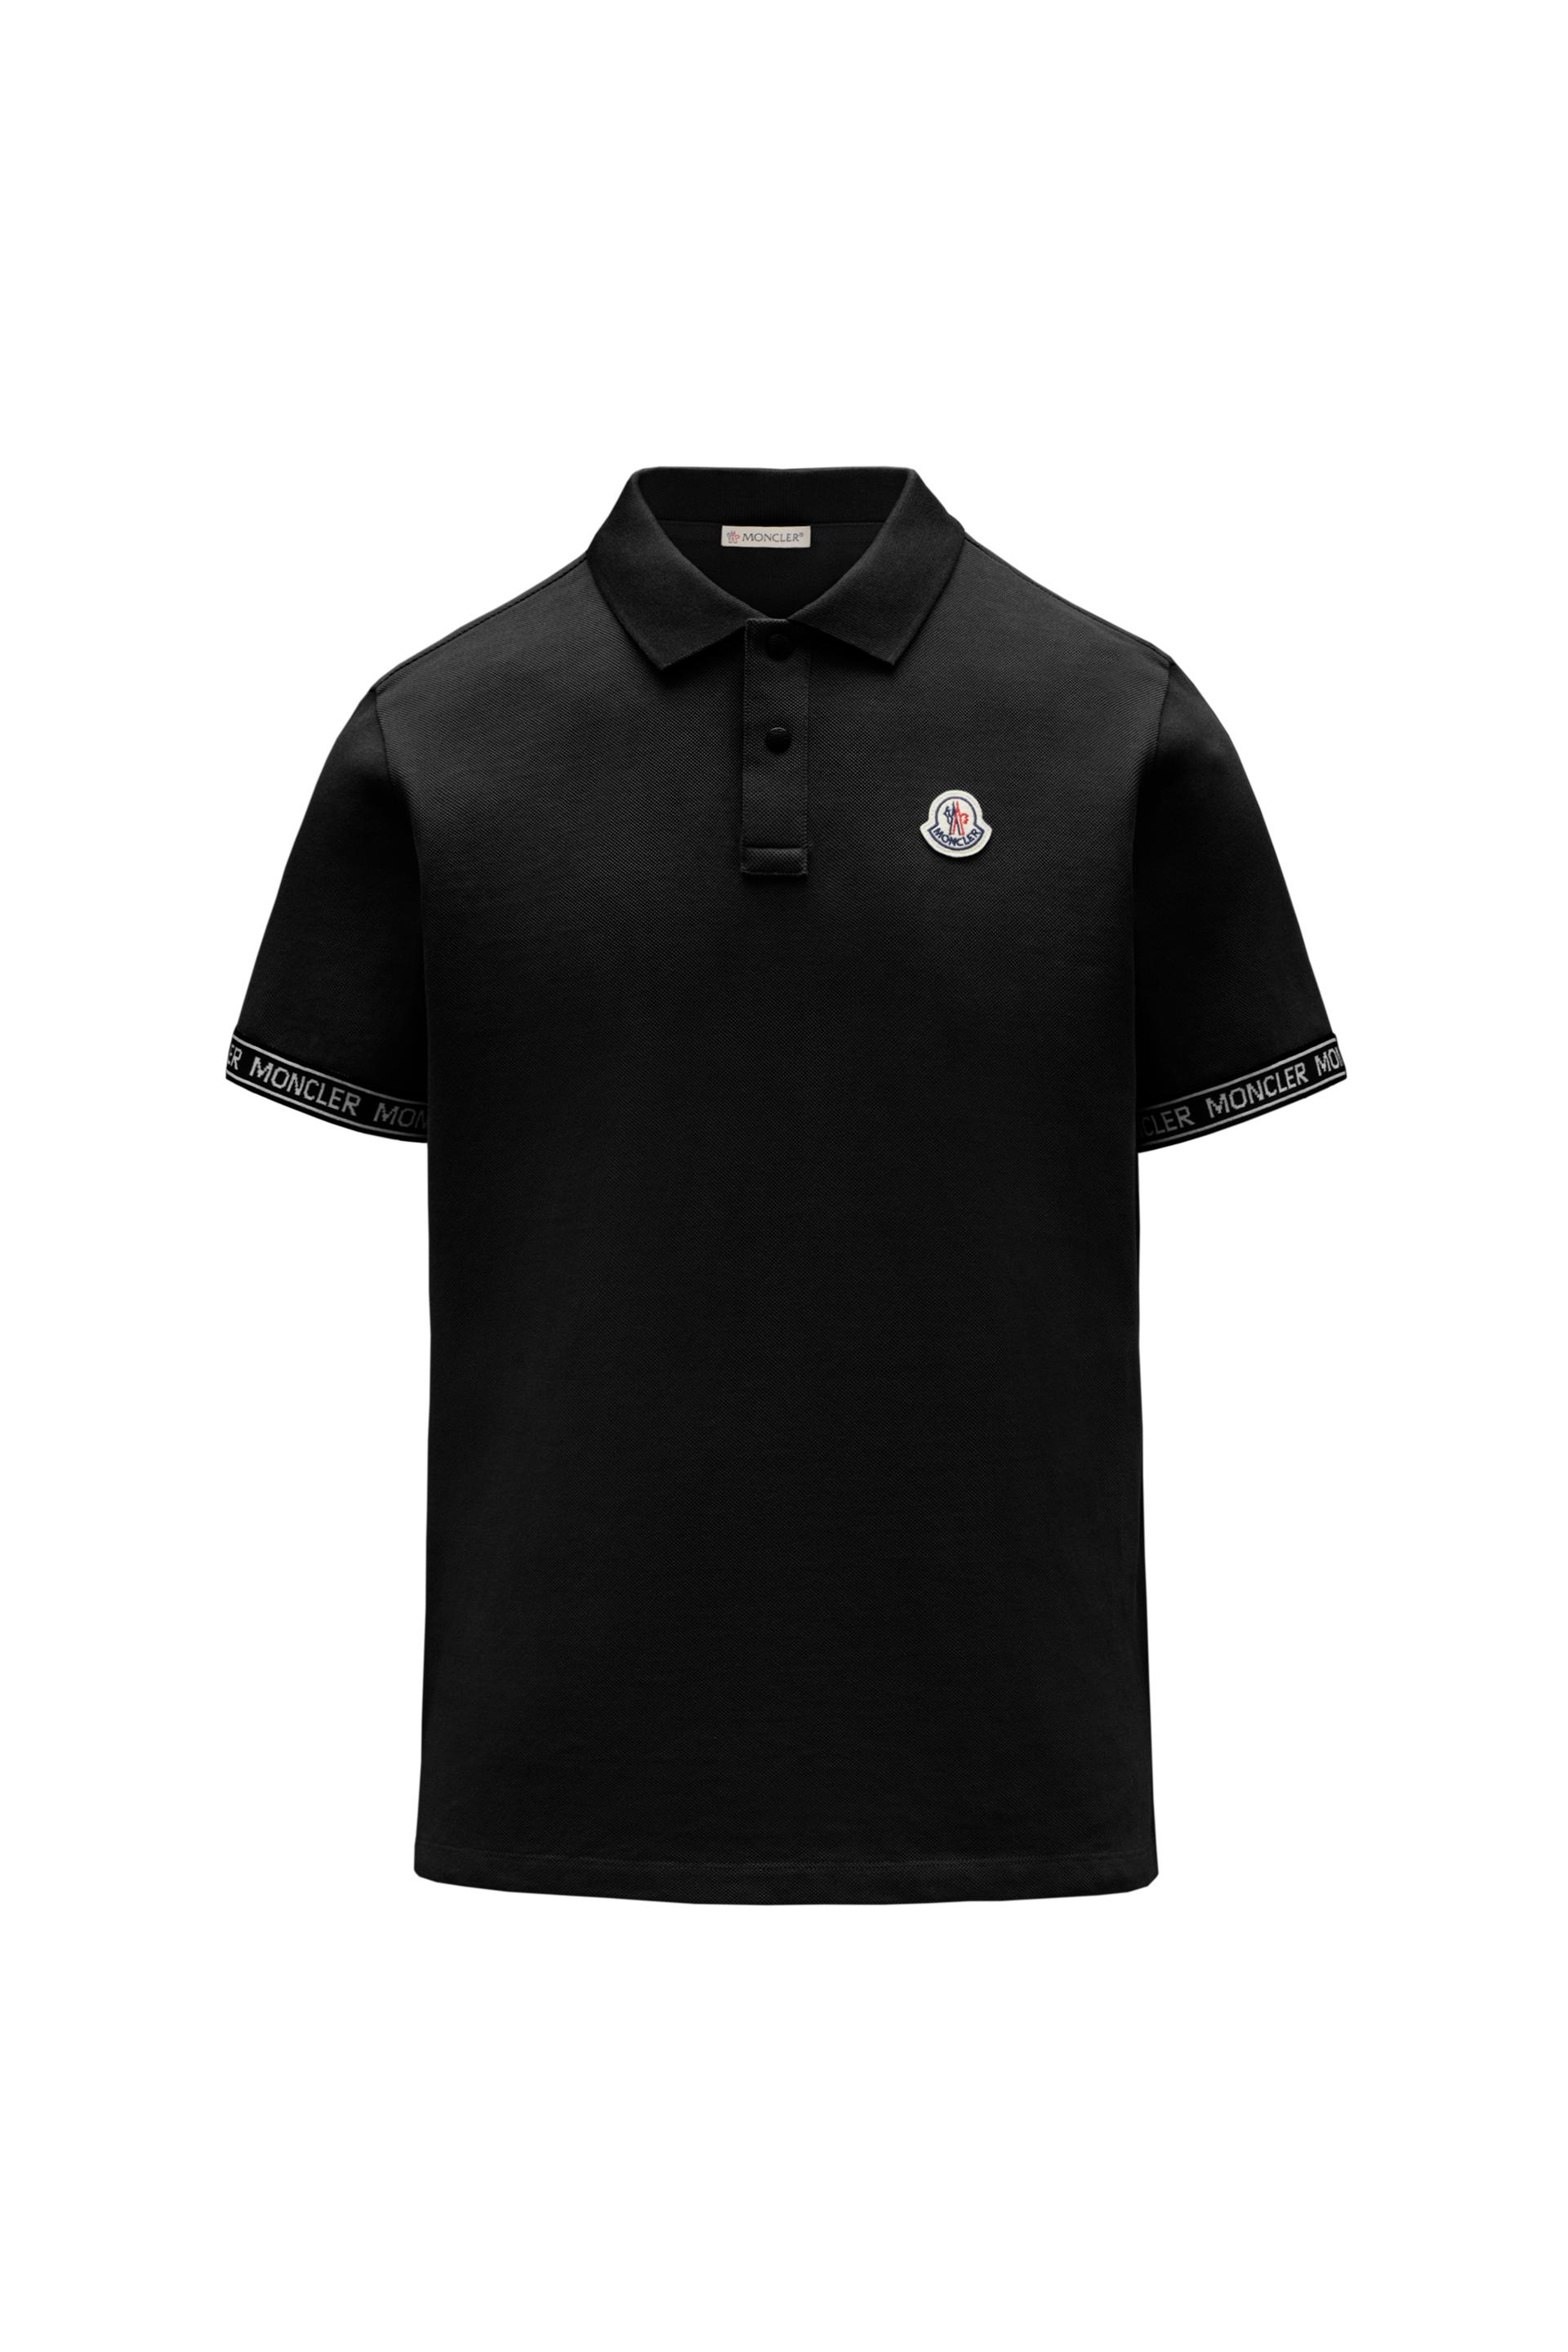 Lyrical fup skade Moncler Polo Shirt With Lettering in Black for Men | Lyst